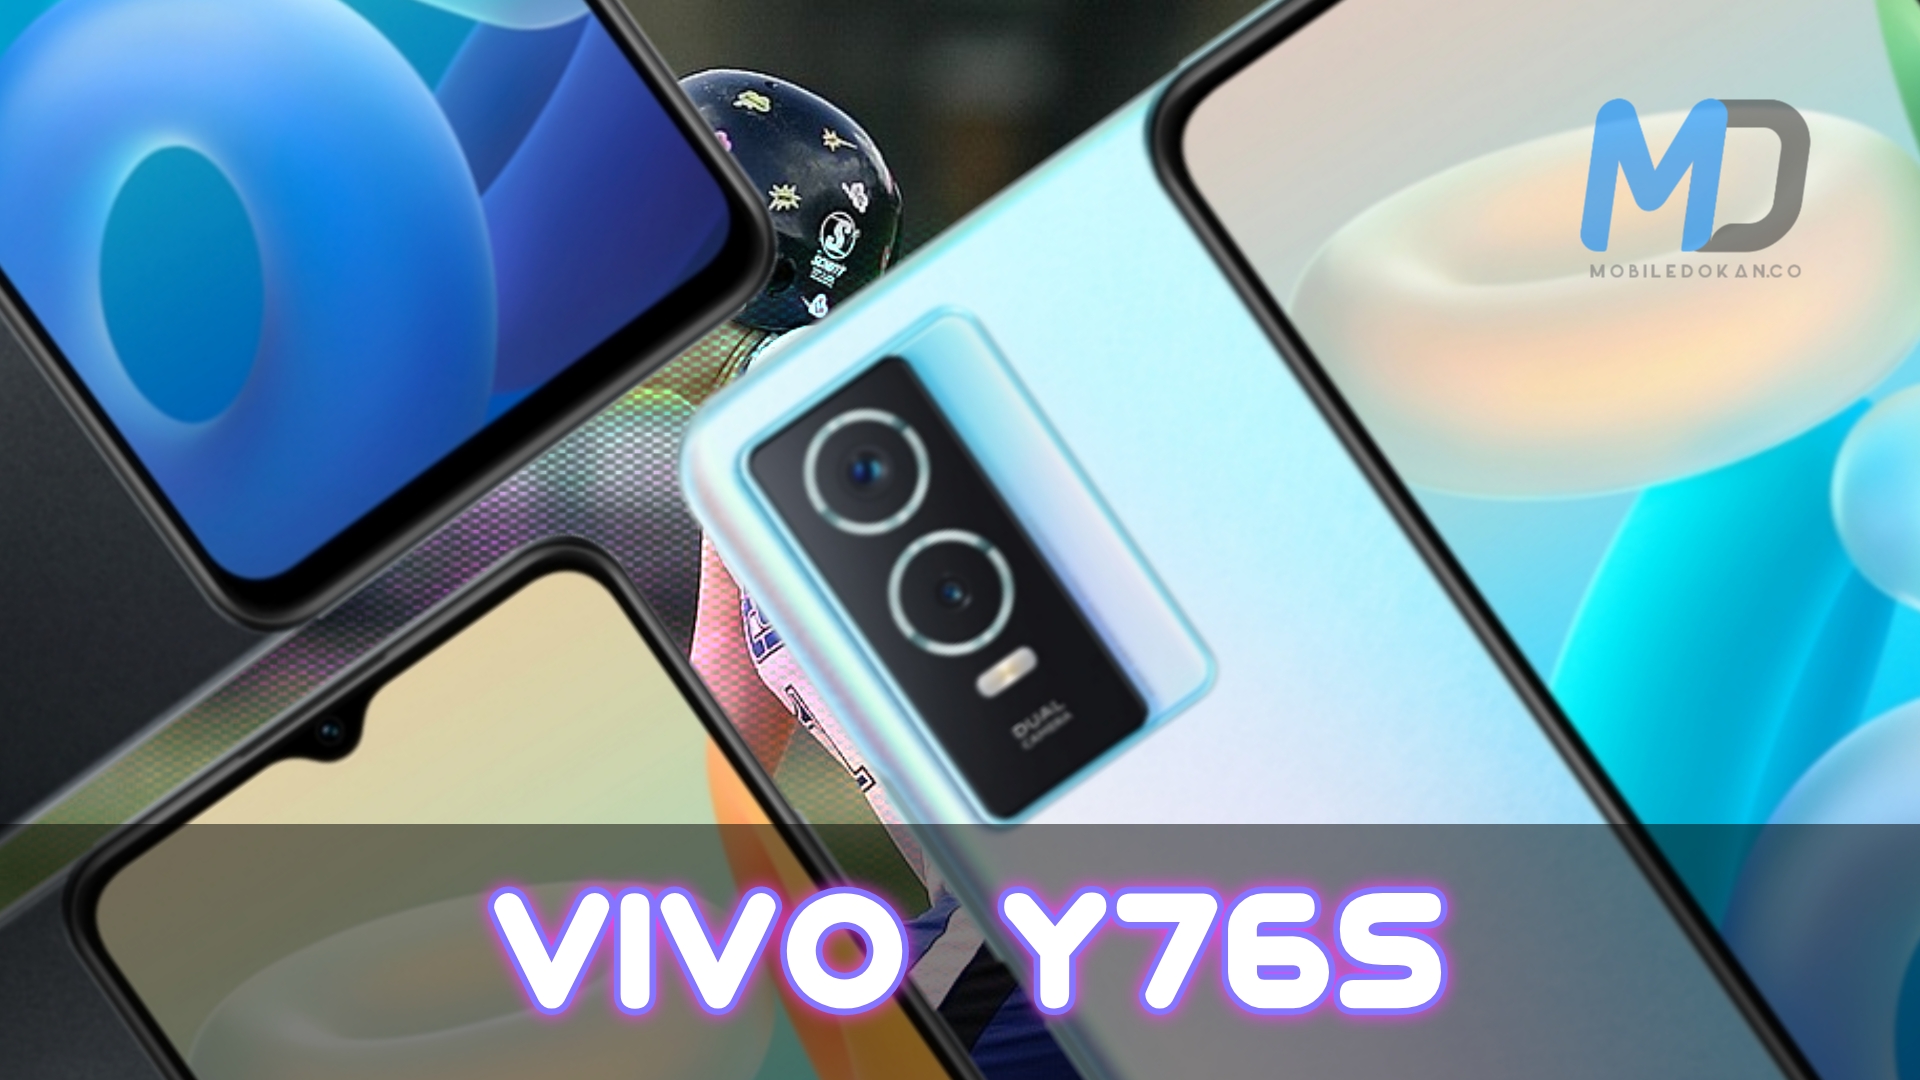 Vivo Y76s launched with 50MP dual cameras, Dimensity 810